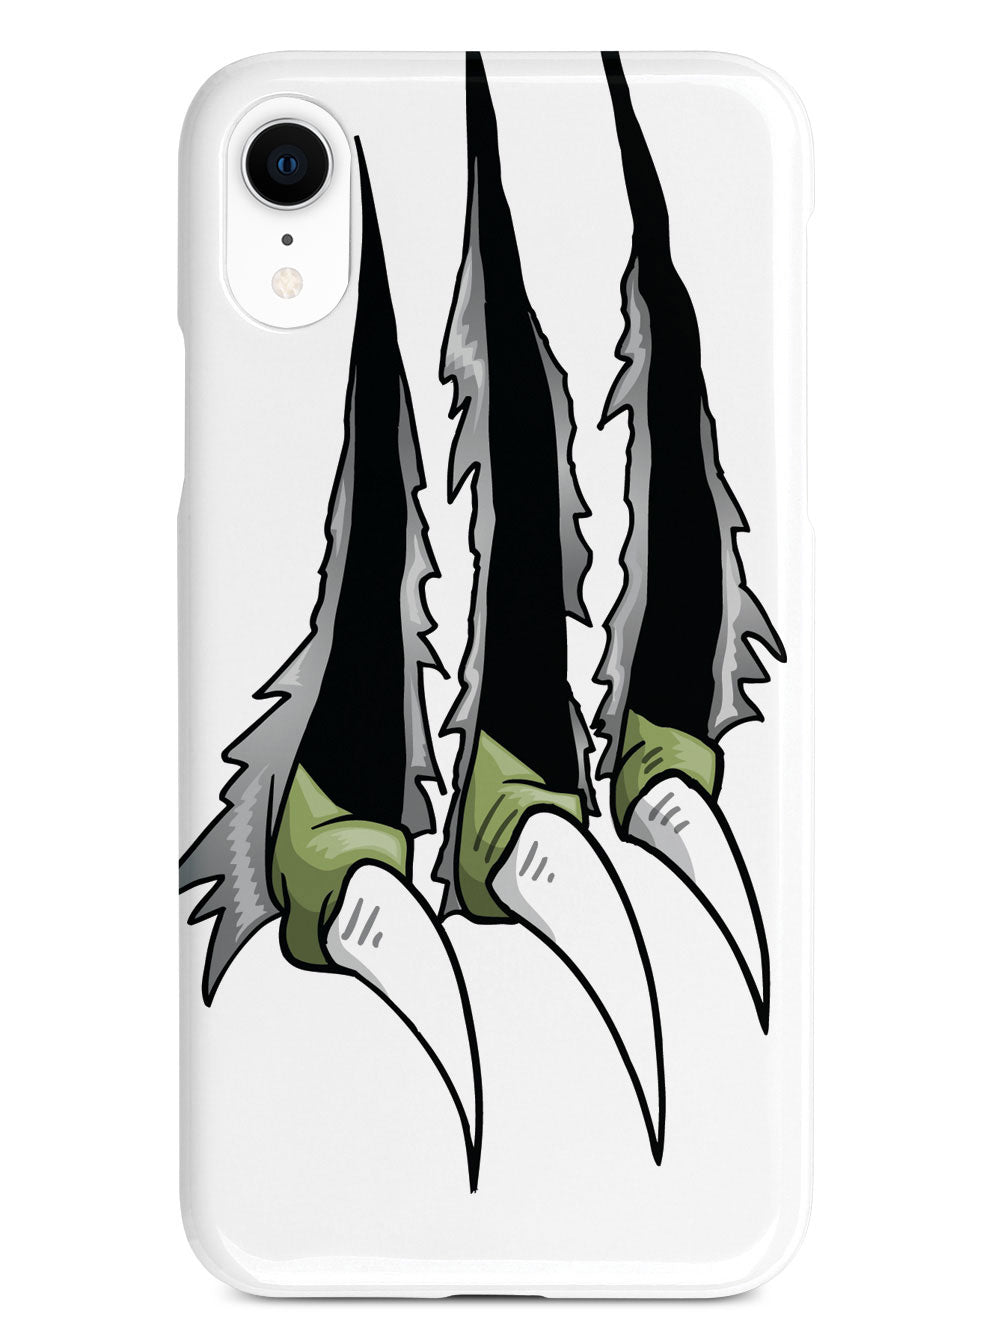 Monster Claw Case